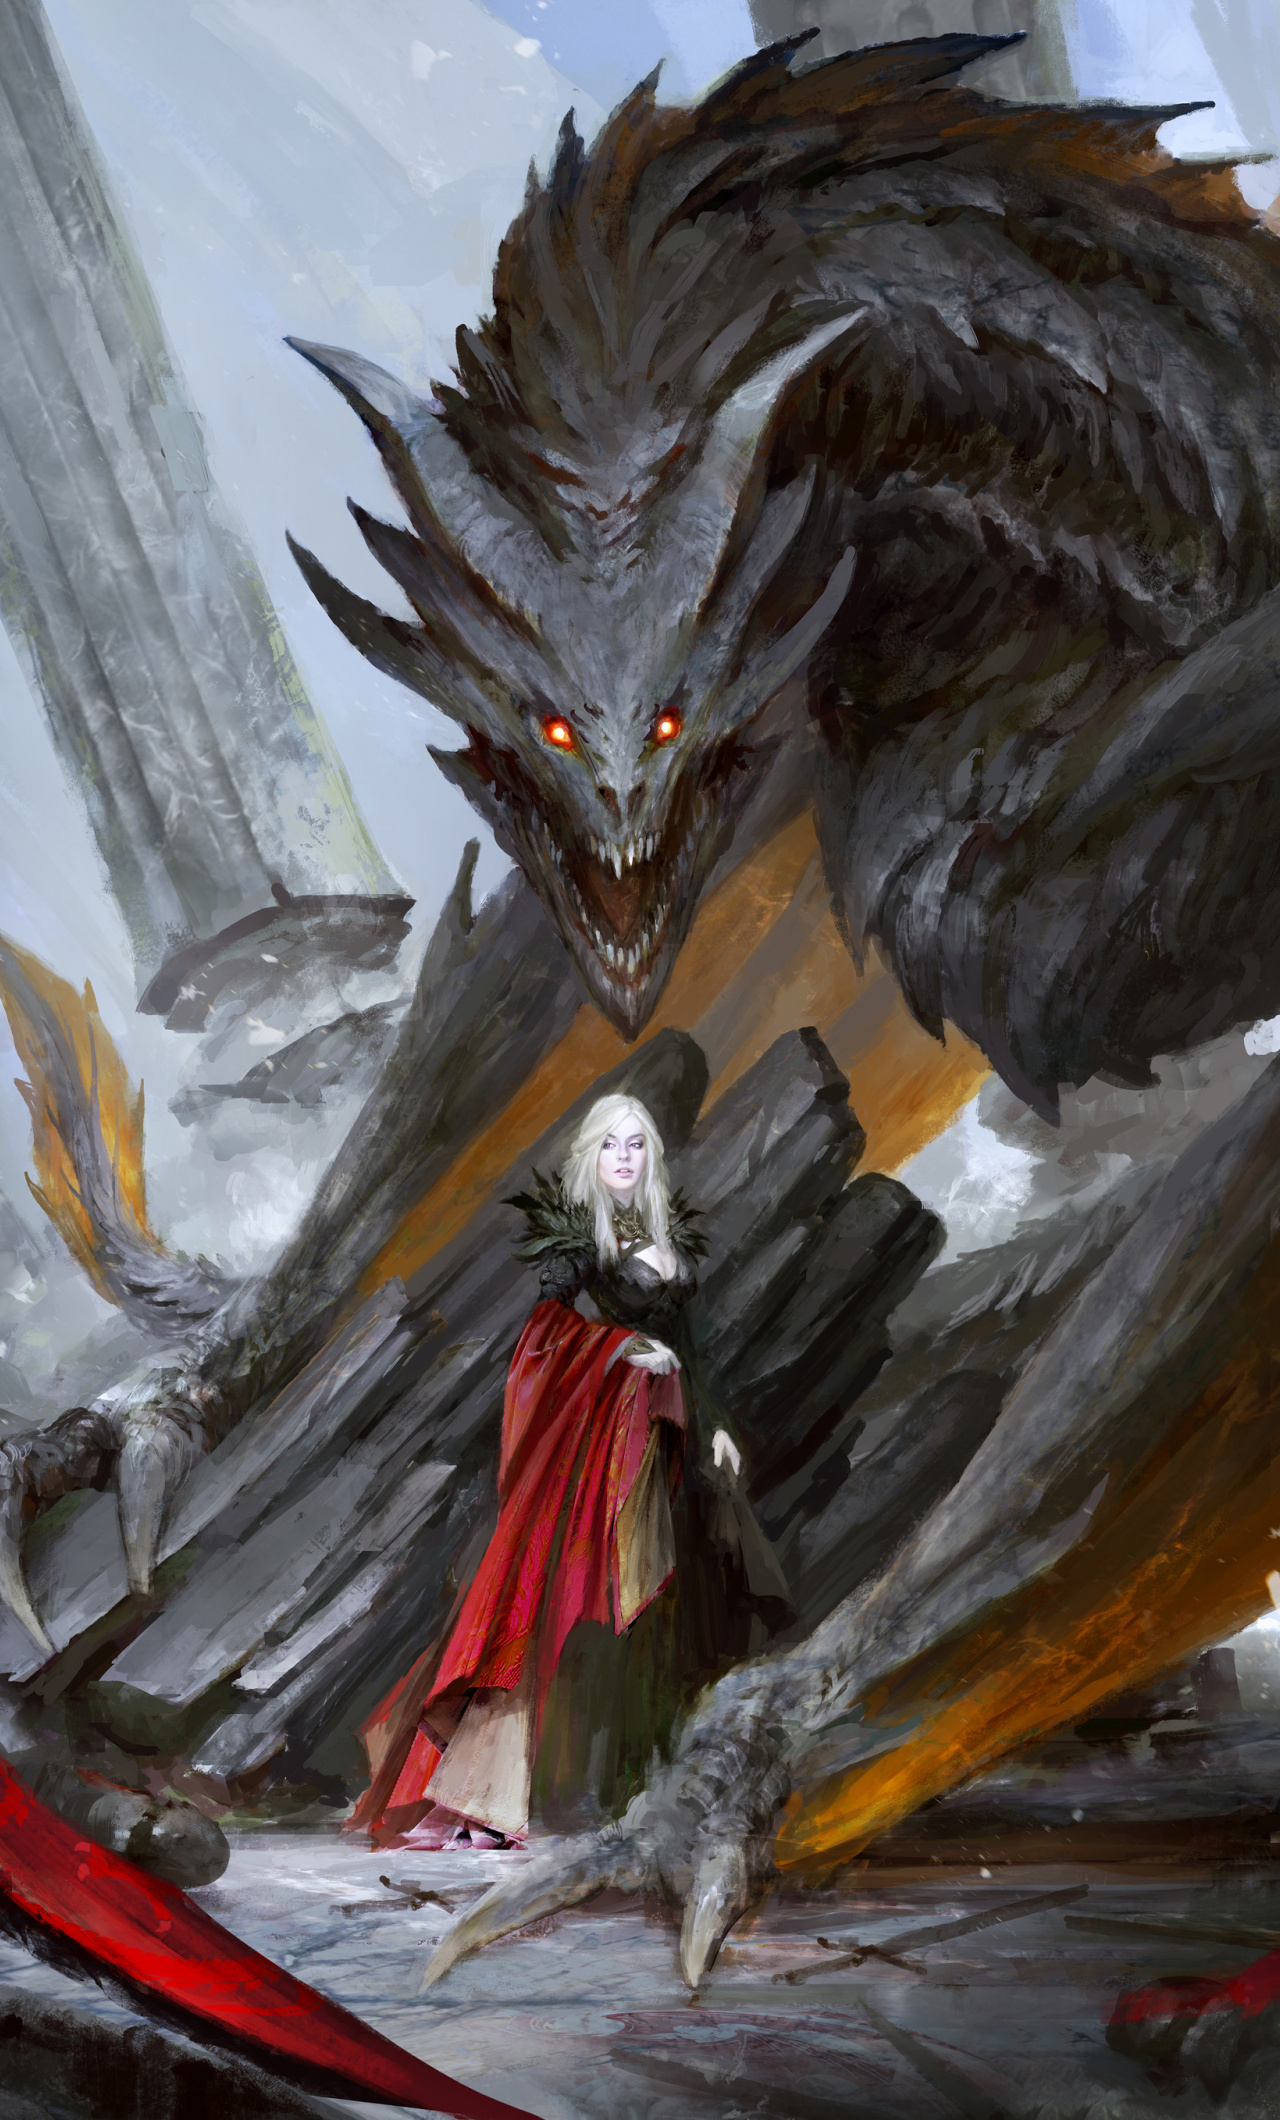 Download Queen and dragon, Game of Thrones, TV show, art wallpaper, 1280x iPhone 6 Plus